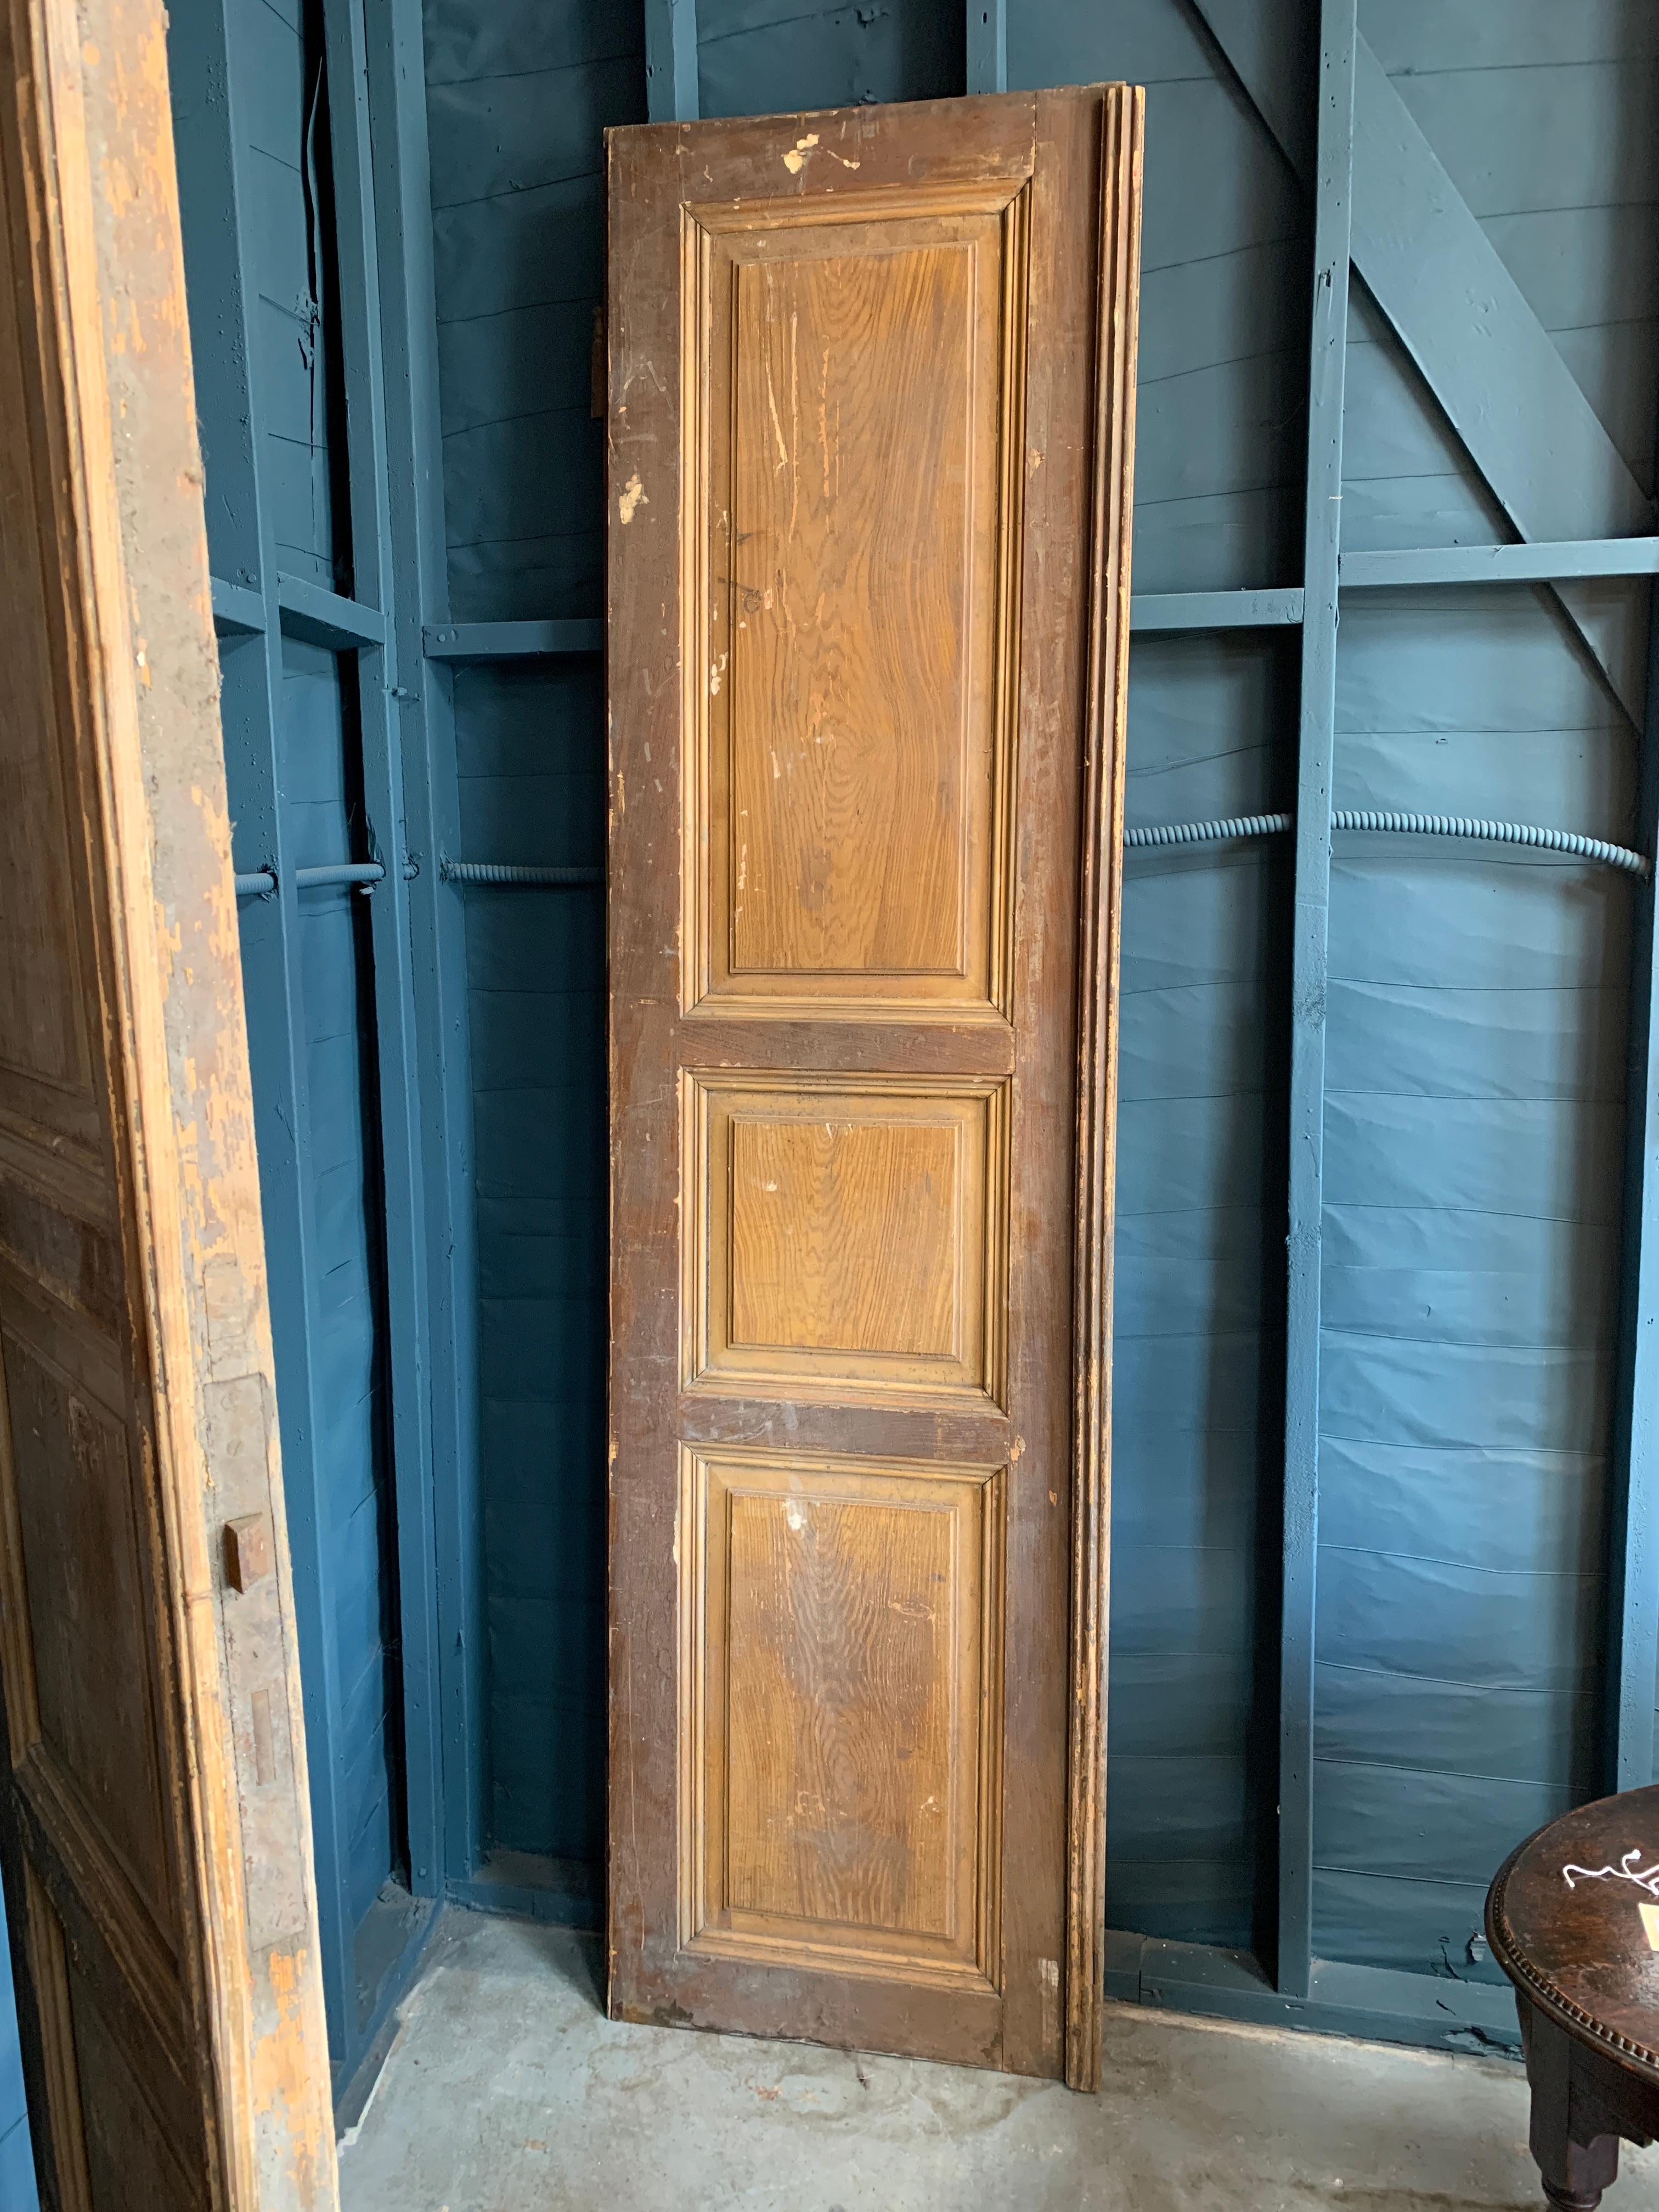 This striking, tall pair of doors wear their age with grace, and would bring character and intrigue to any doorway. They also work remarkably well as accent pieces, taking a bare corner and turning it in to an eye-catching gateway to the past.